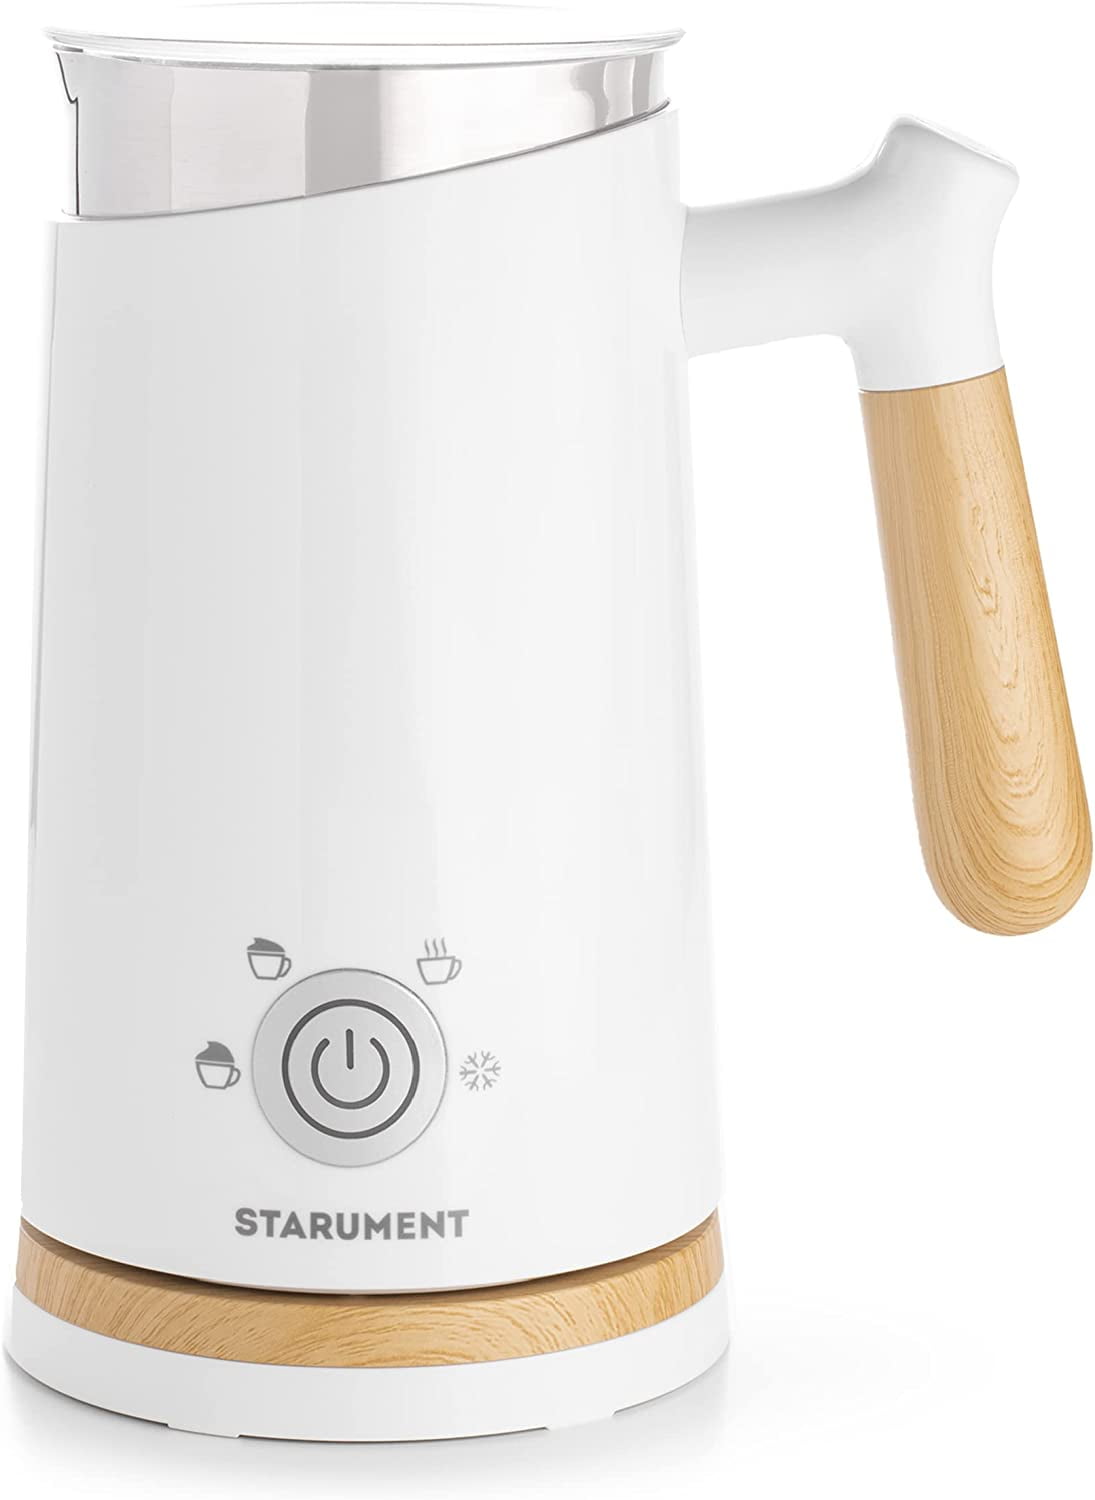 Starument Electric Milk Frother Automatic Milk Foamer & Heater for Coffee-  Green